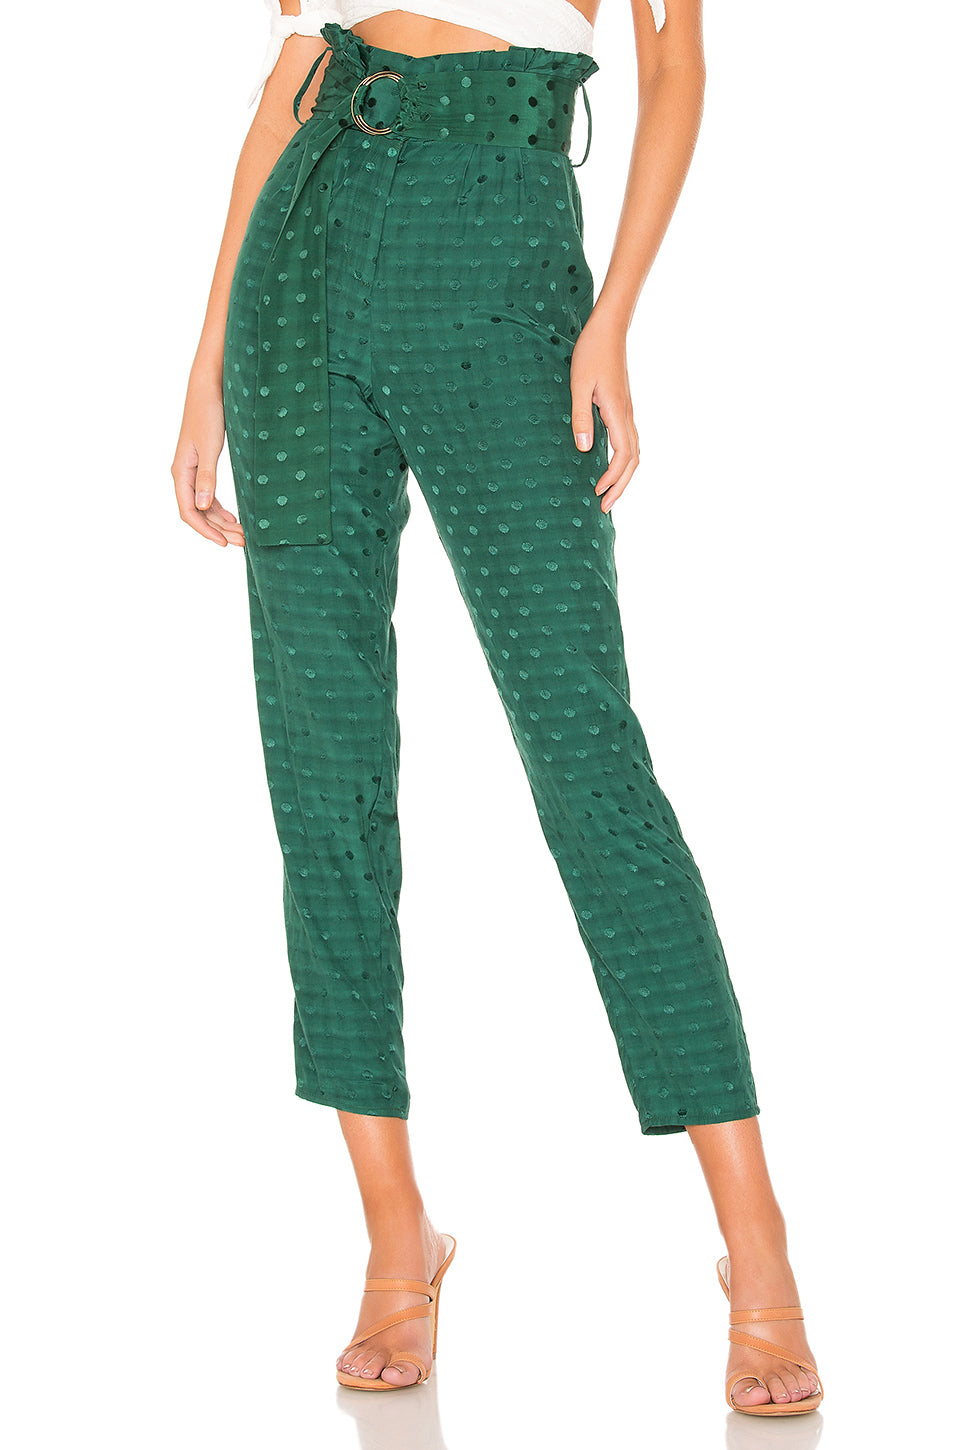 Greyson Pant in EMERALD